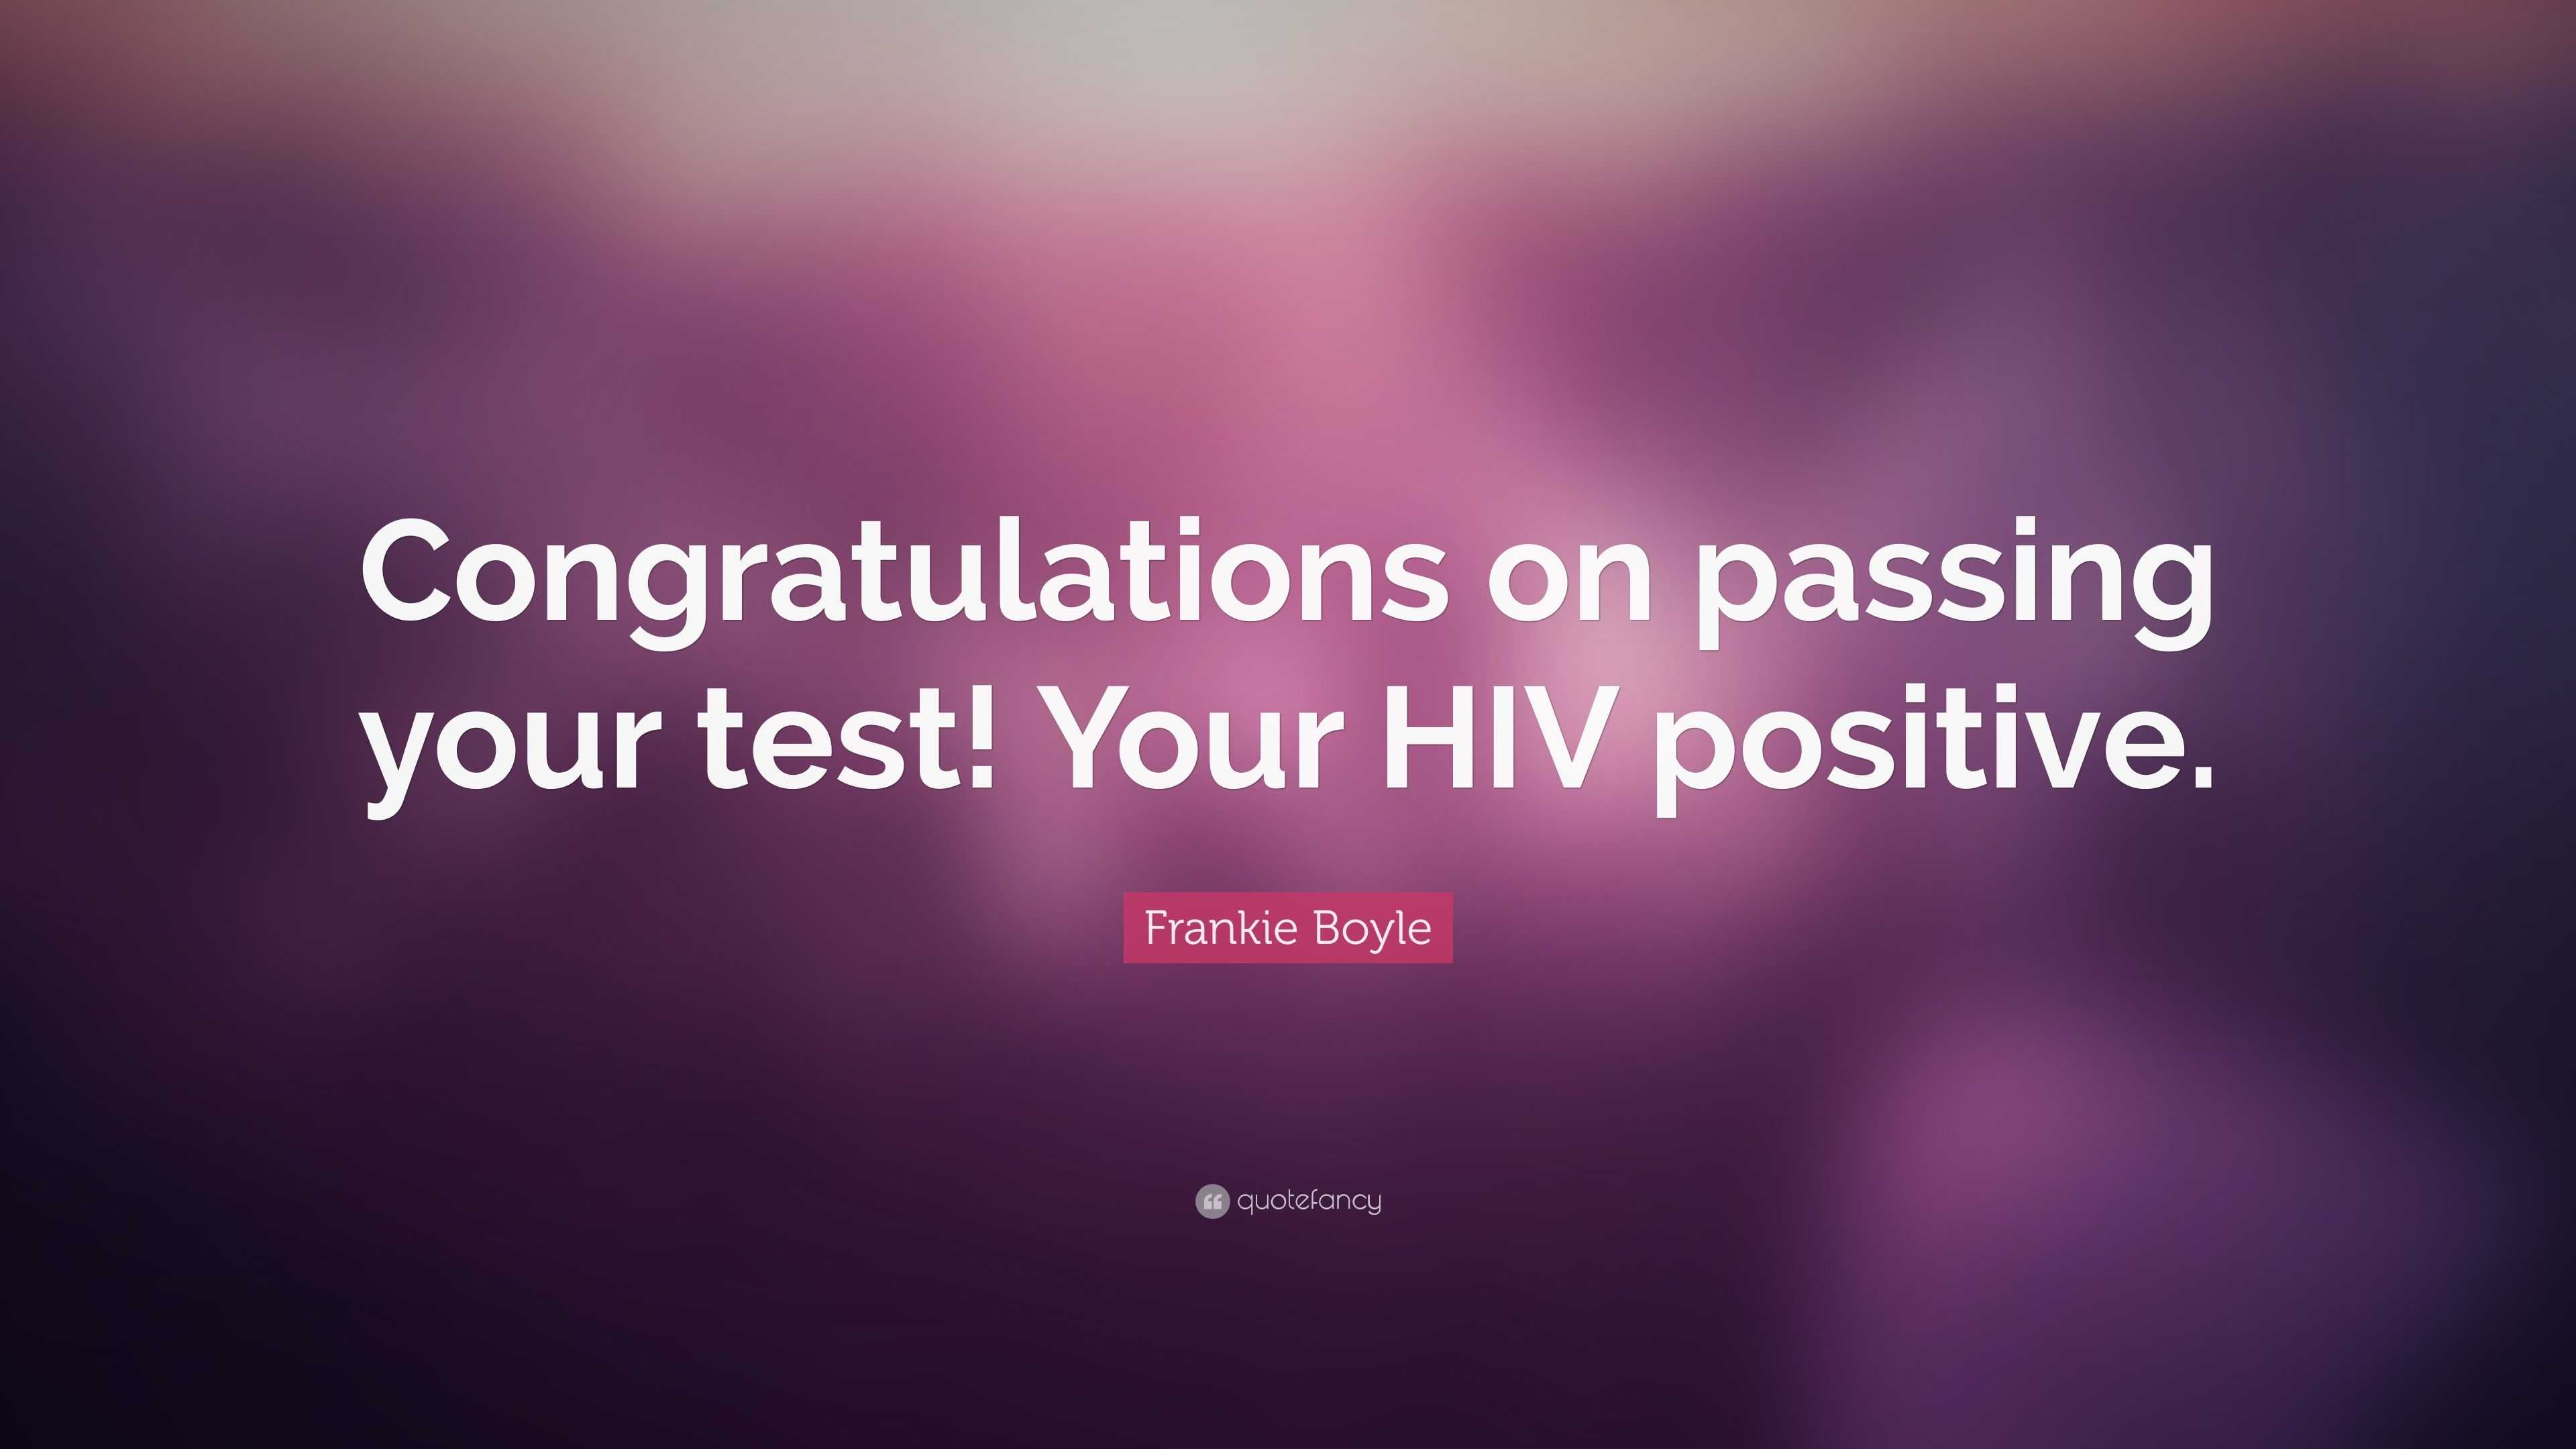 Frankie Boyle Quote: "Congratulations on passing your test ...